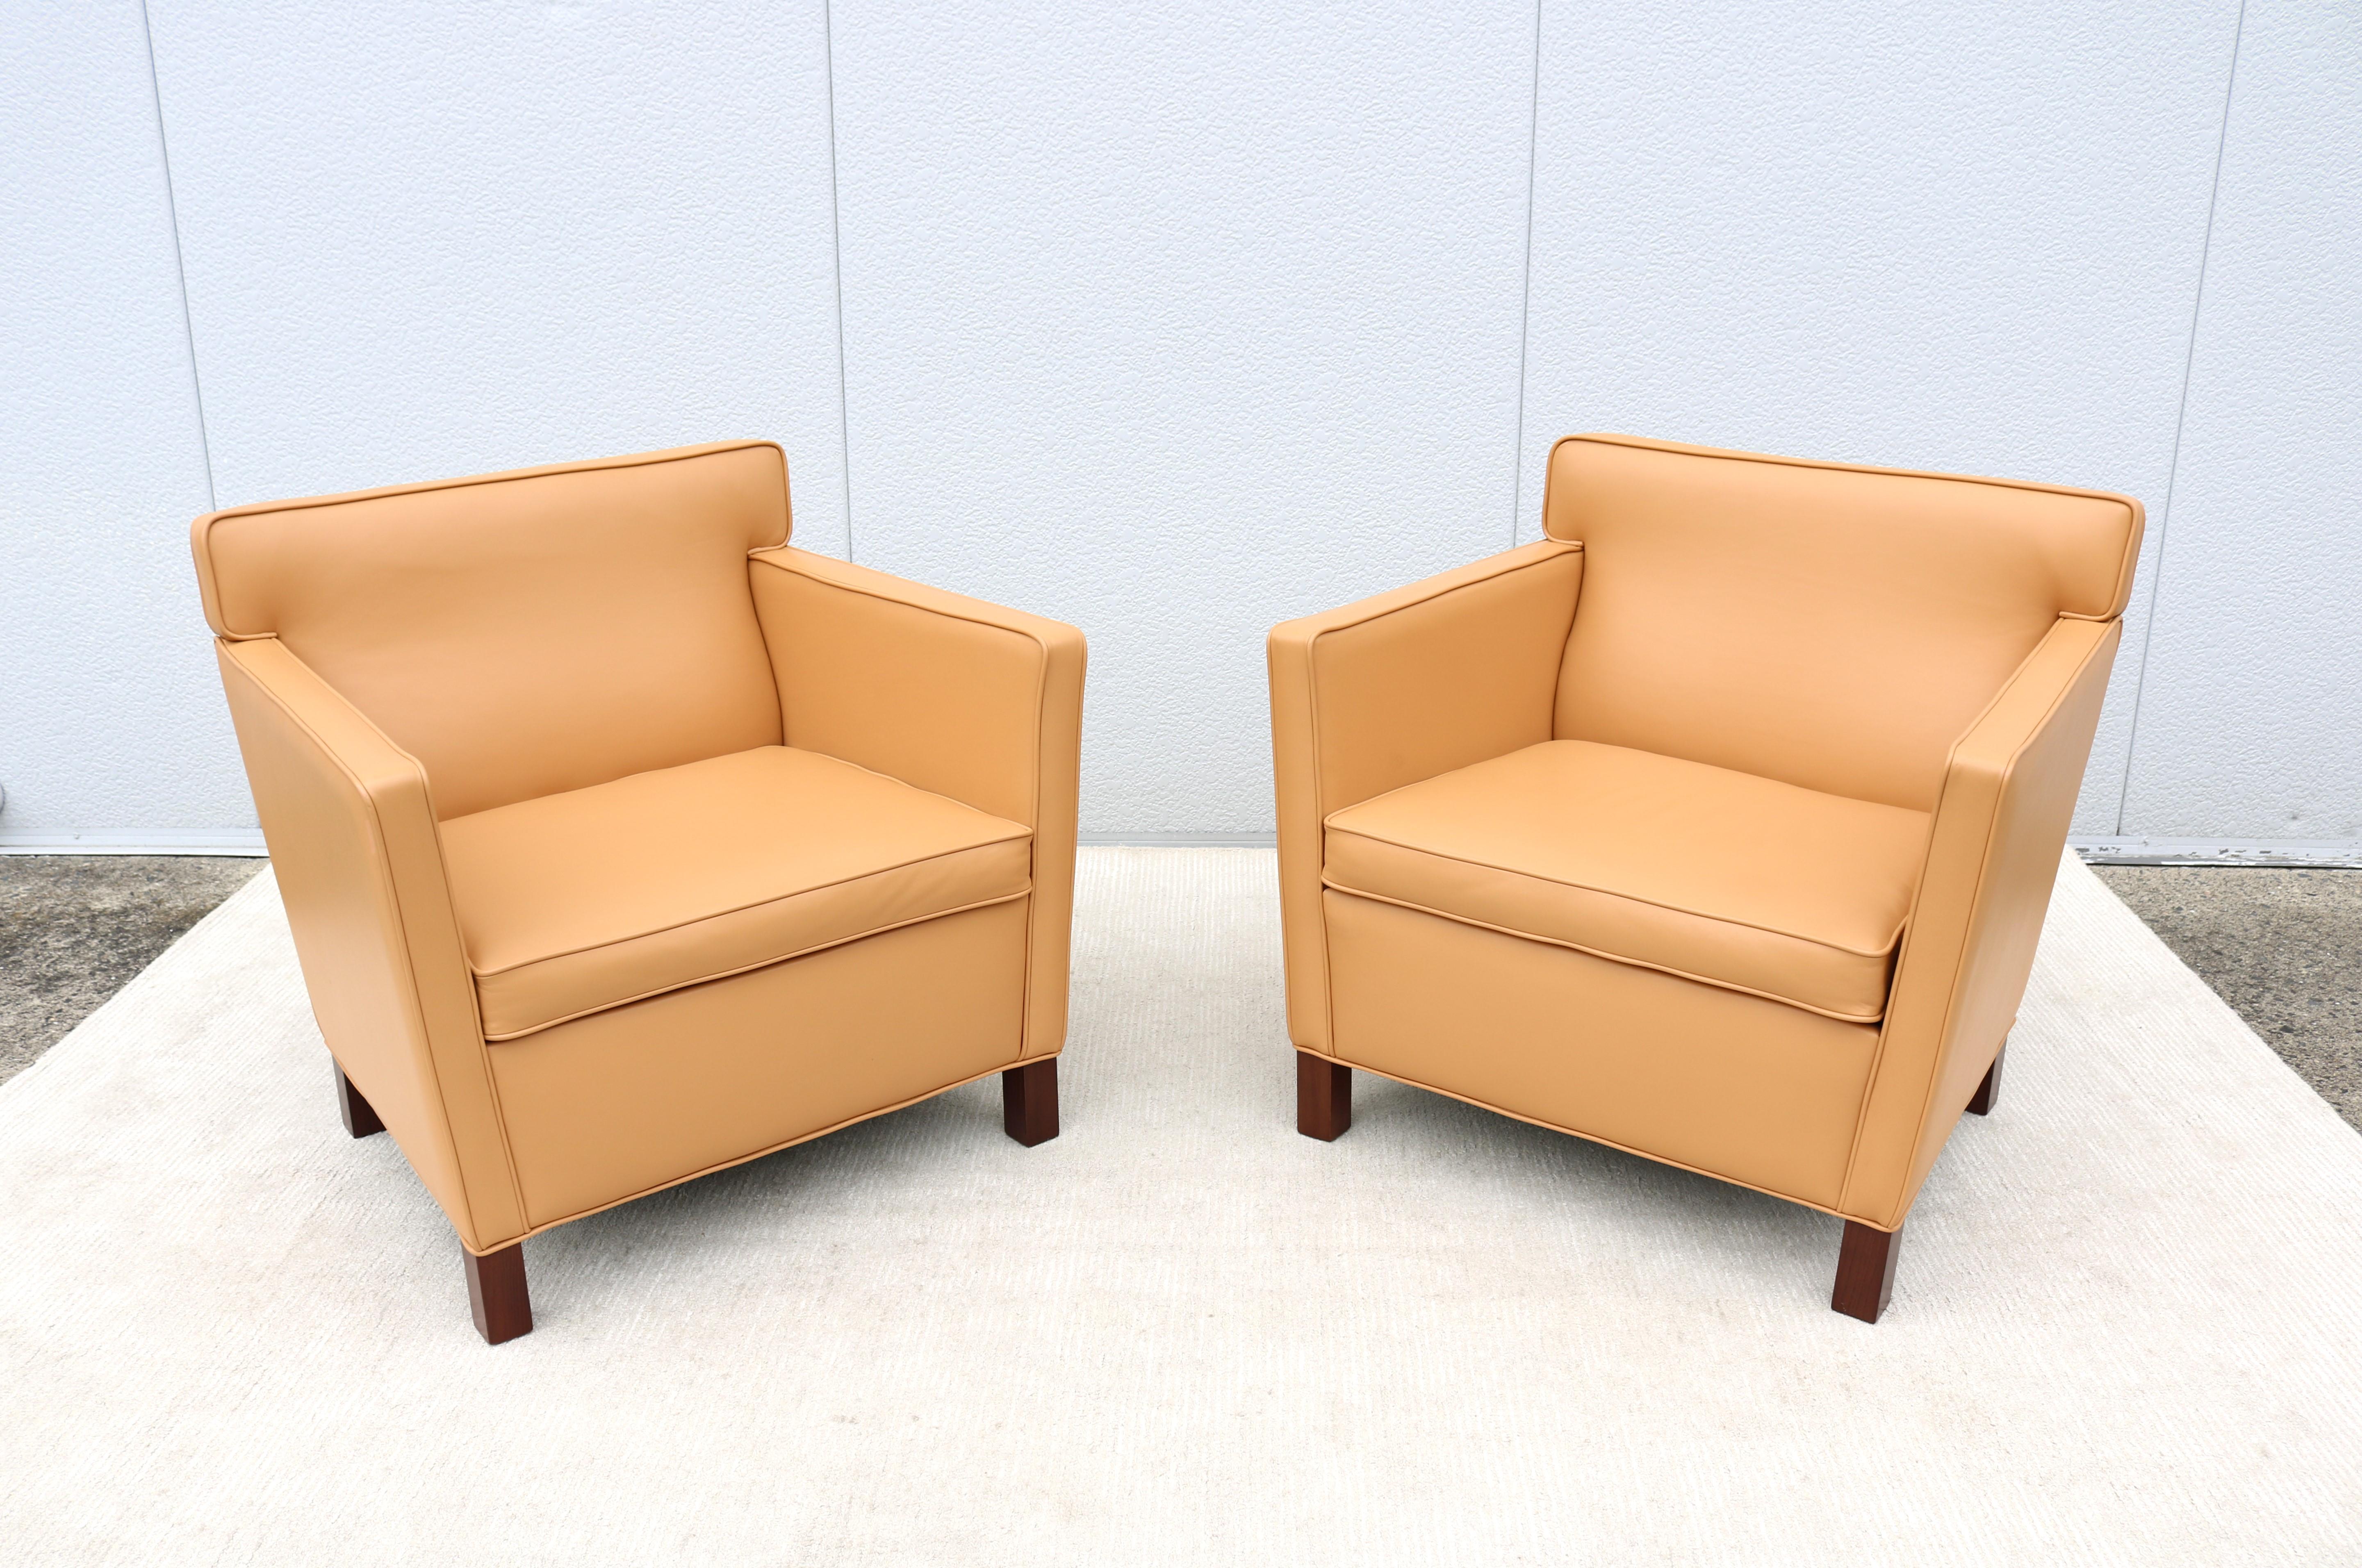 American Mid-Century Modern Ludwig Mies van der Rohe for Knoll Krefeld Lounge Chairs Pair For Sale